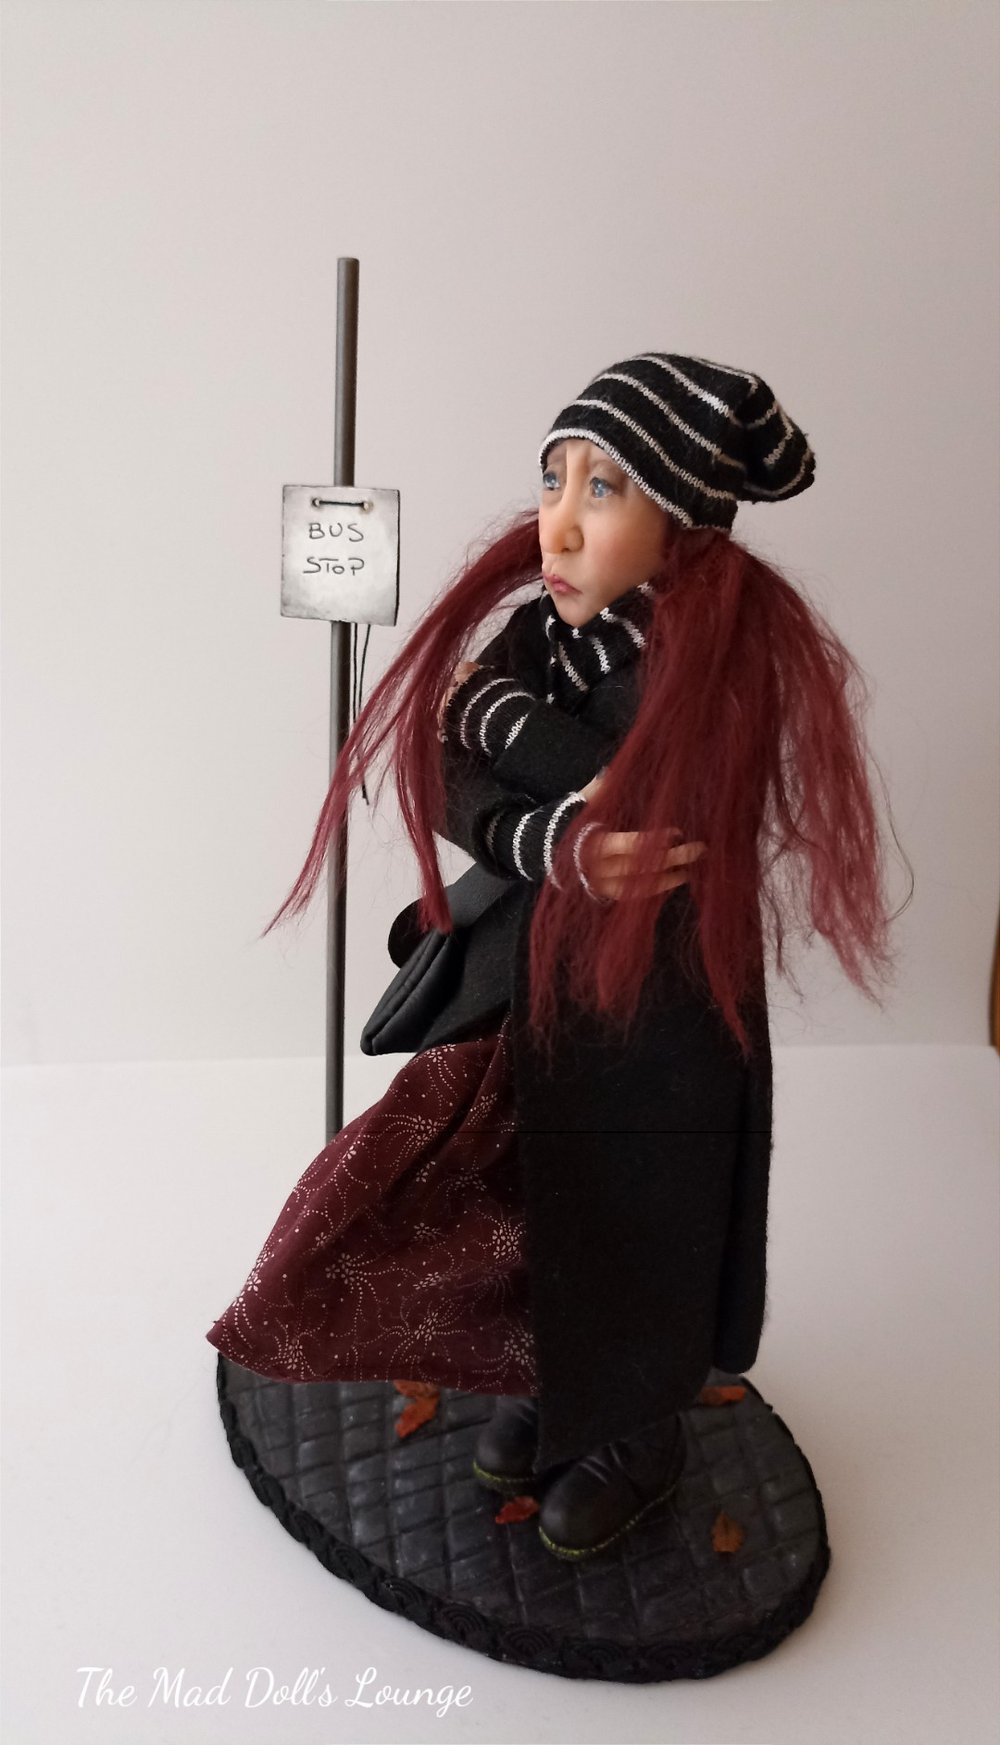 Image of Art Doll OOAK "At the Bus Stop" Winter landscape - Handmade art doll on wooden base 